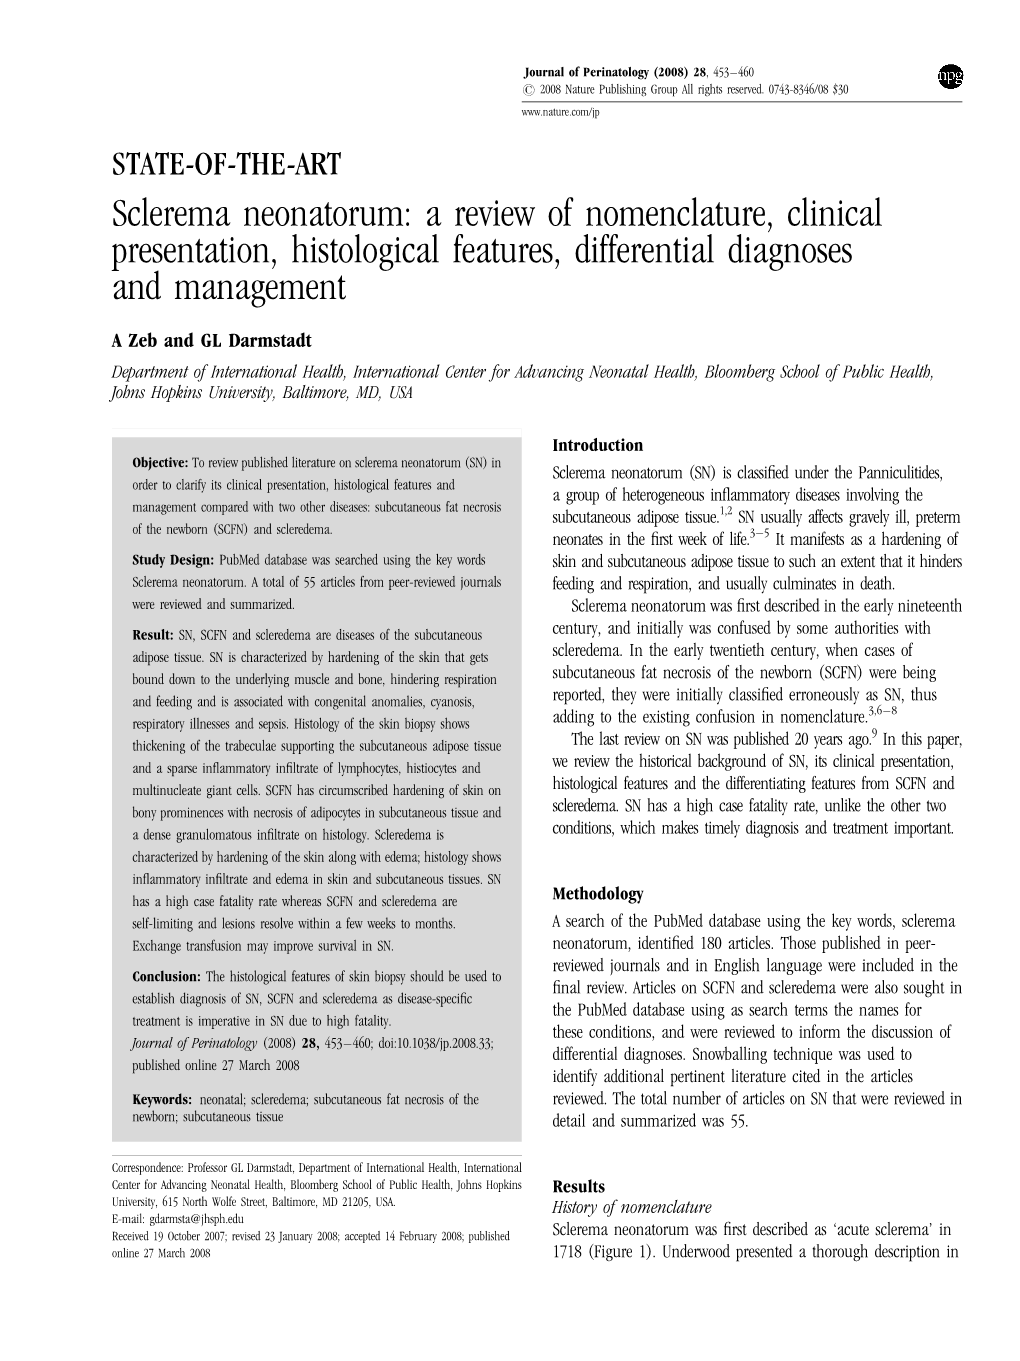 Sclerema Neonatorum: a Review of Nomenclature, Clinical Presentation, Histological Features, Differential Diagnoses and Management